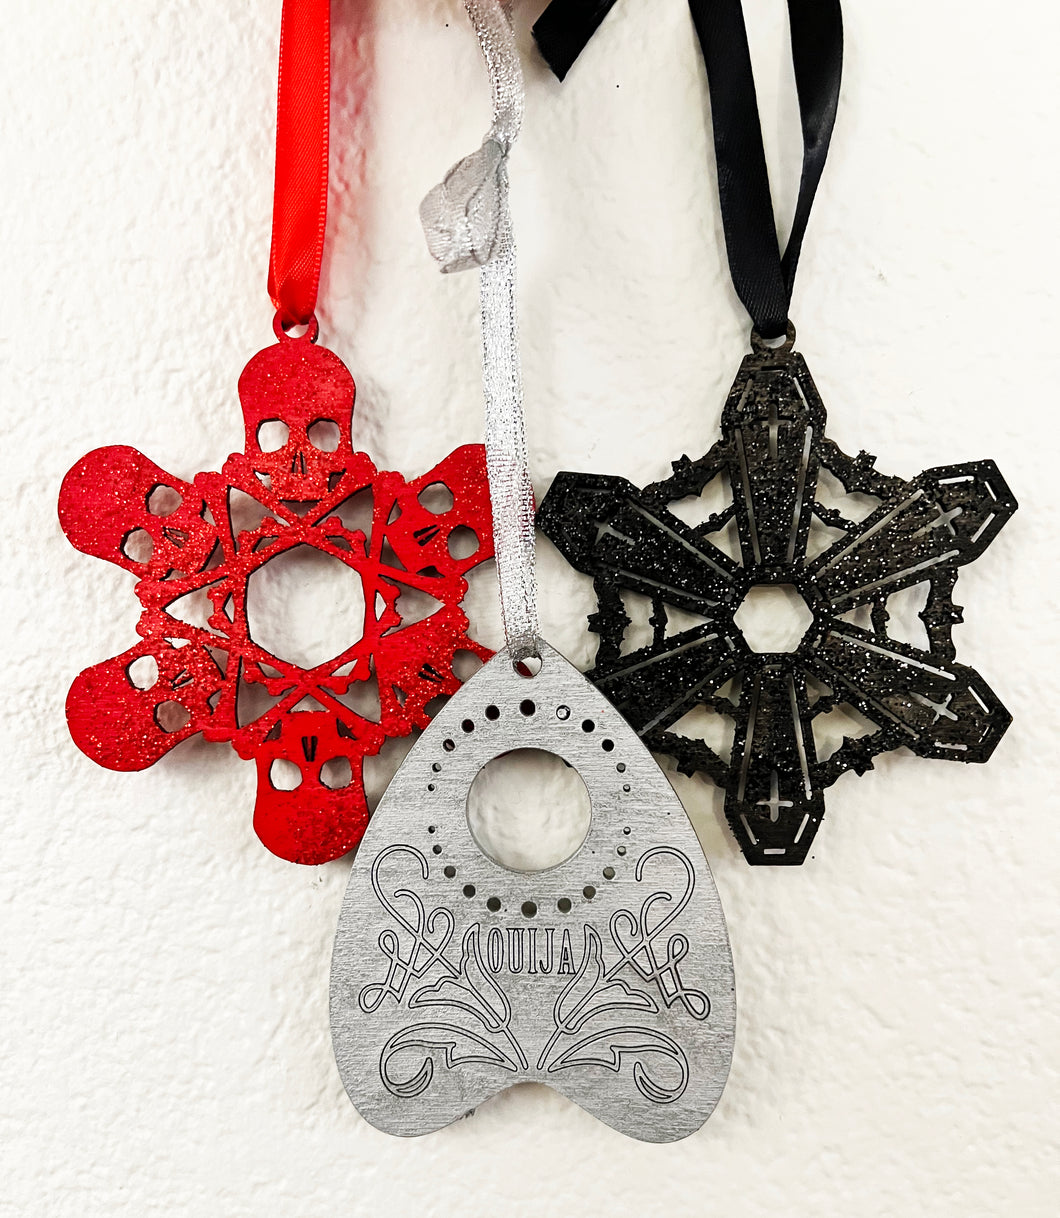 Gothic ornaments